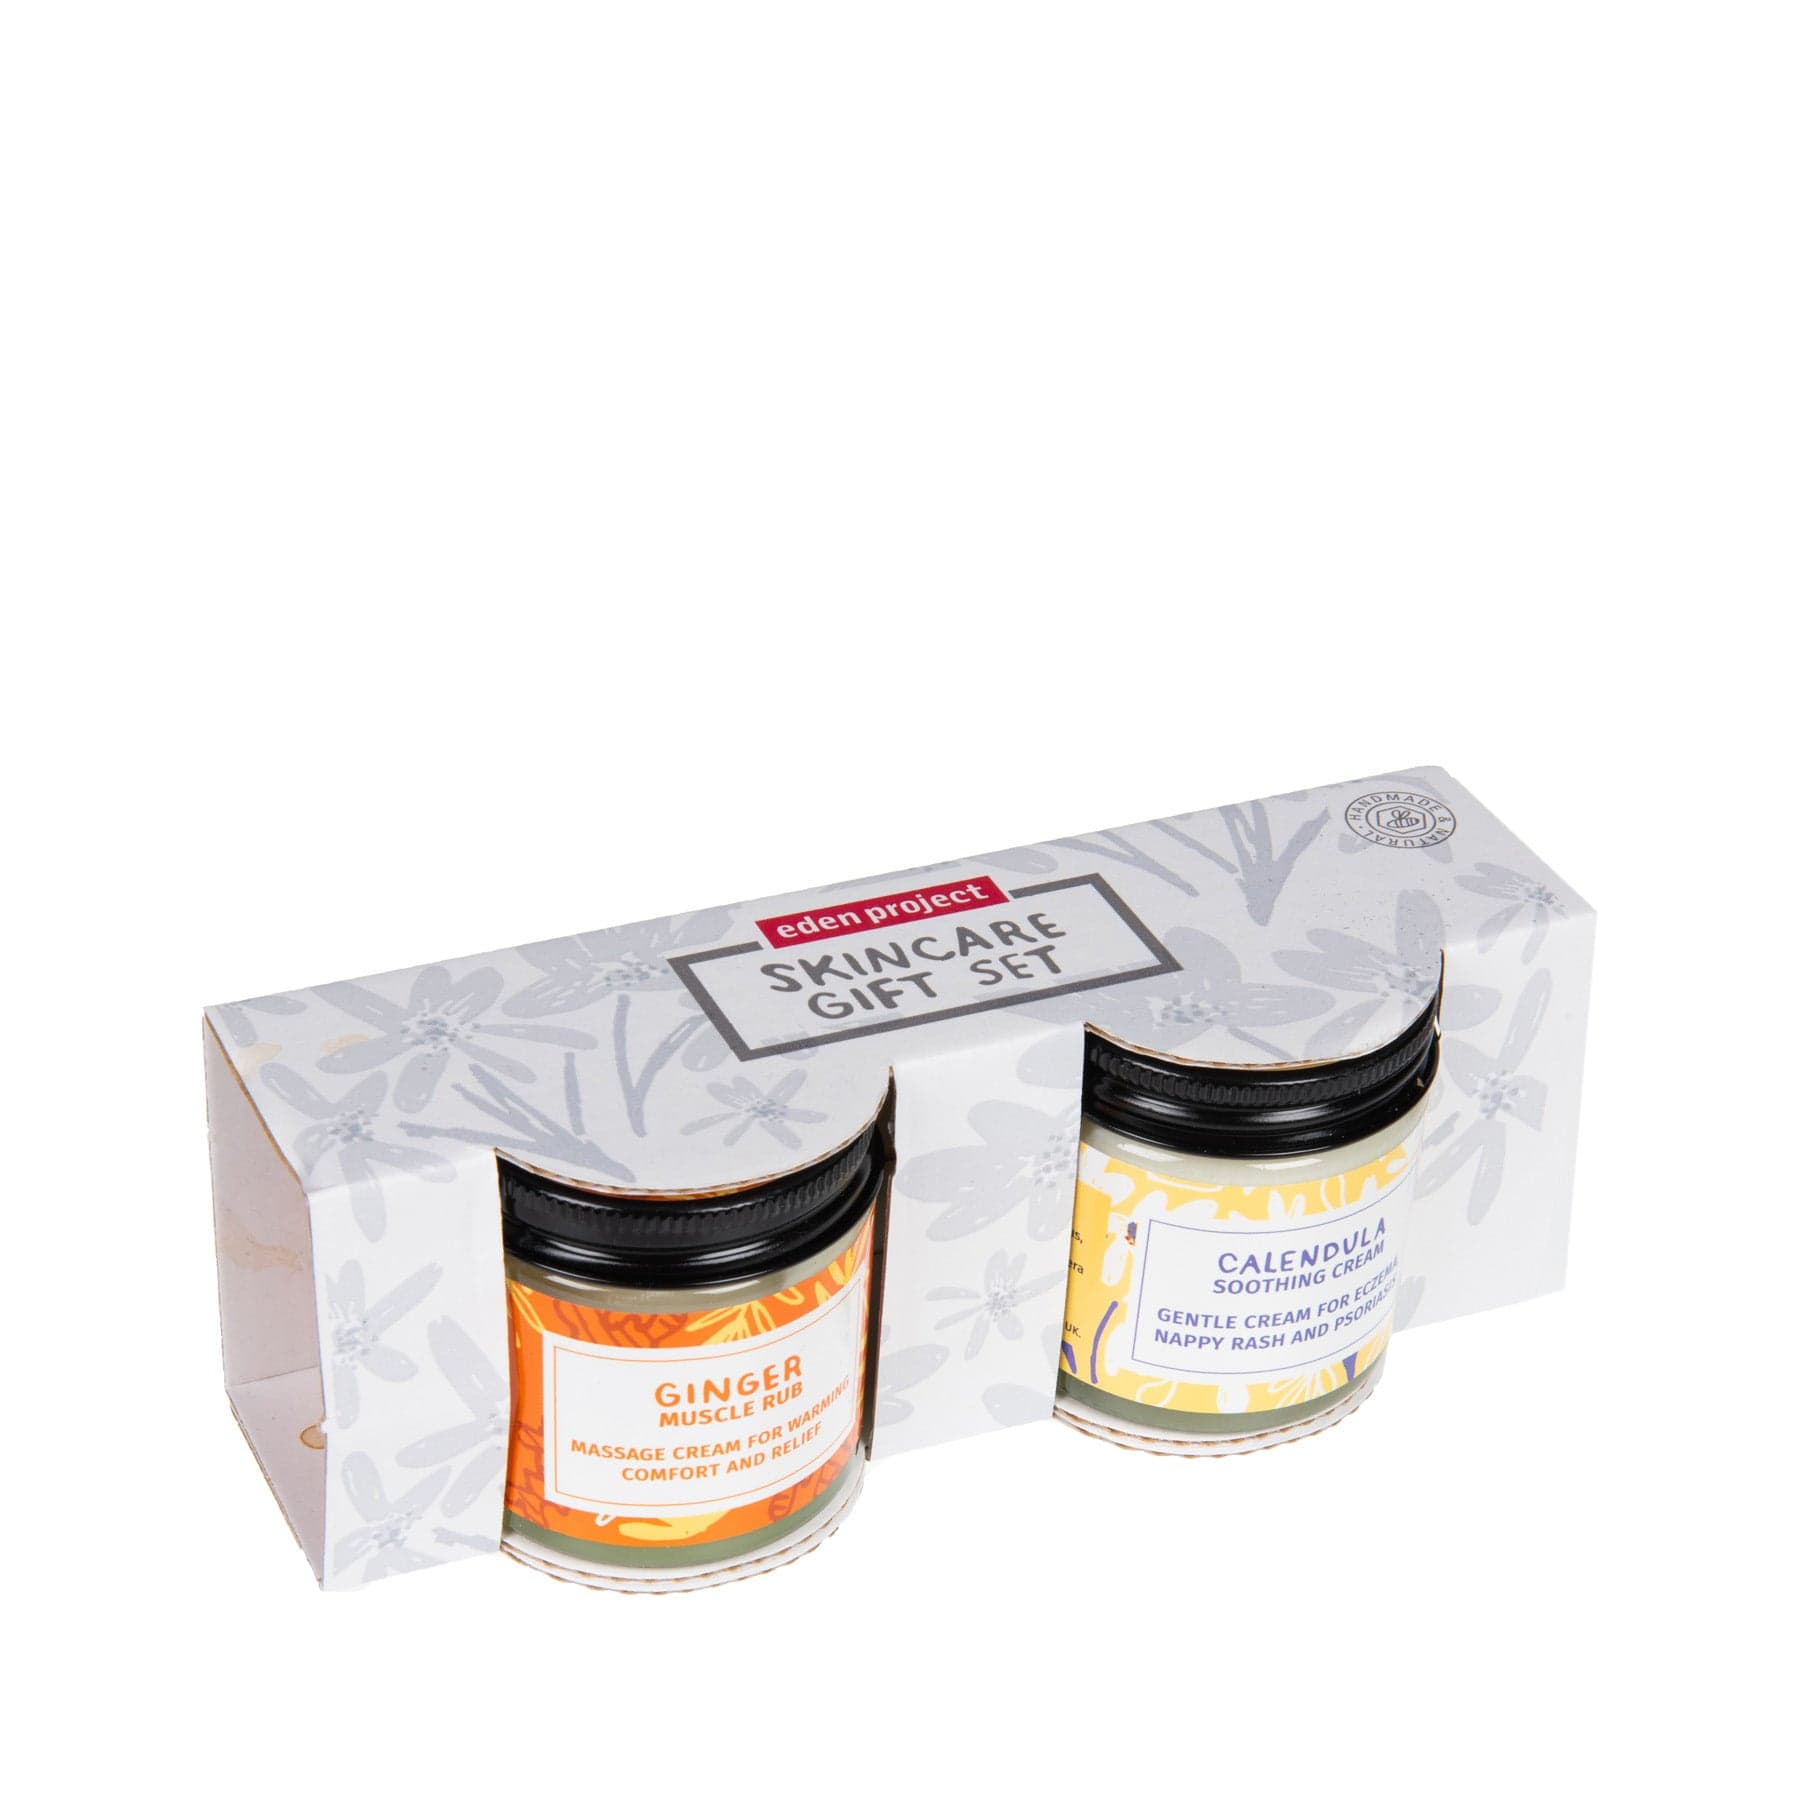 Muscle rub & soothing cream gift set